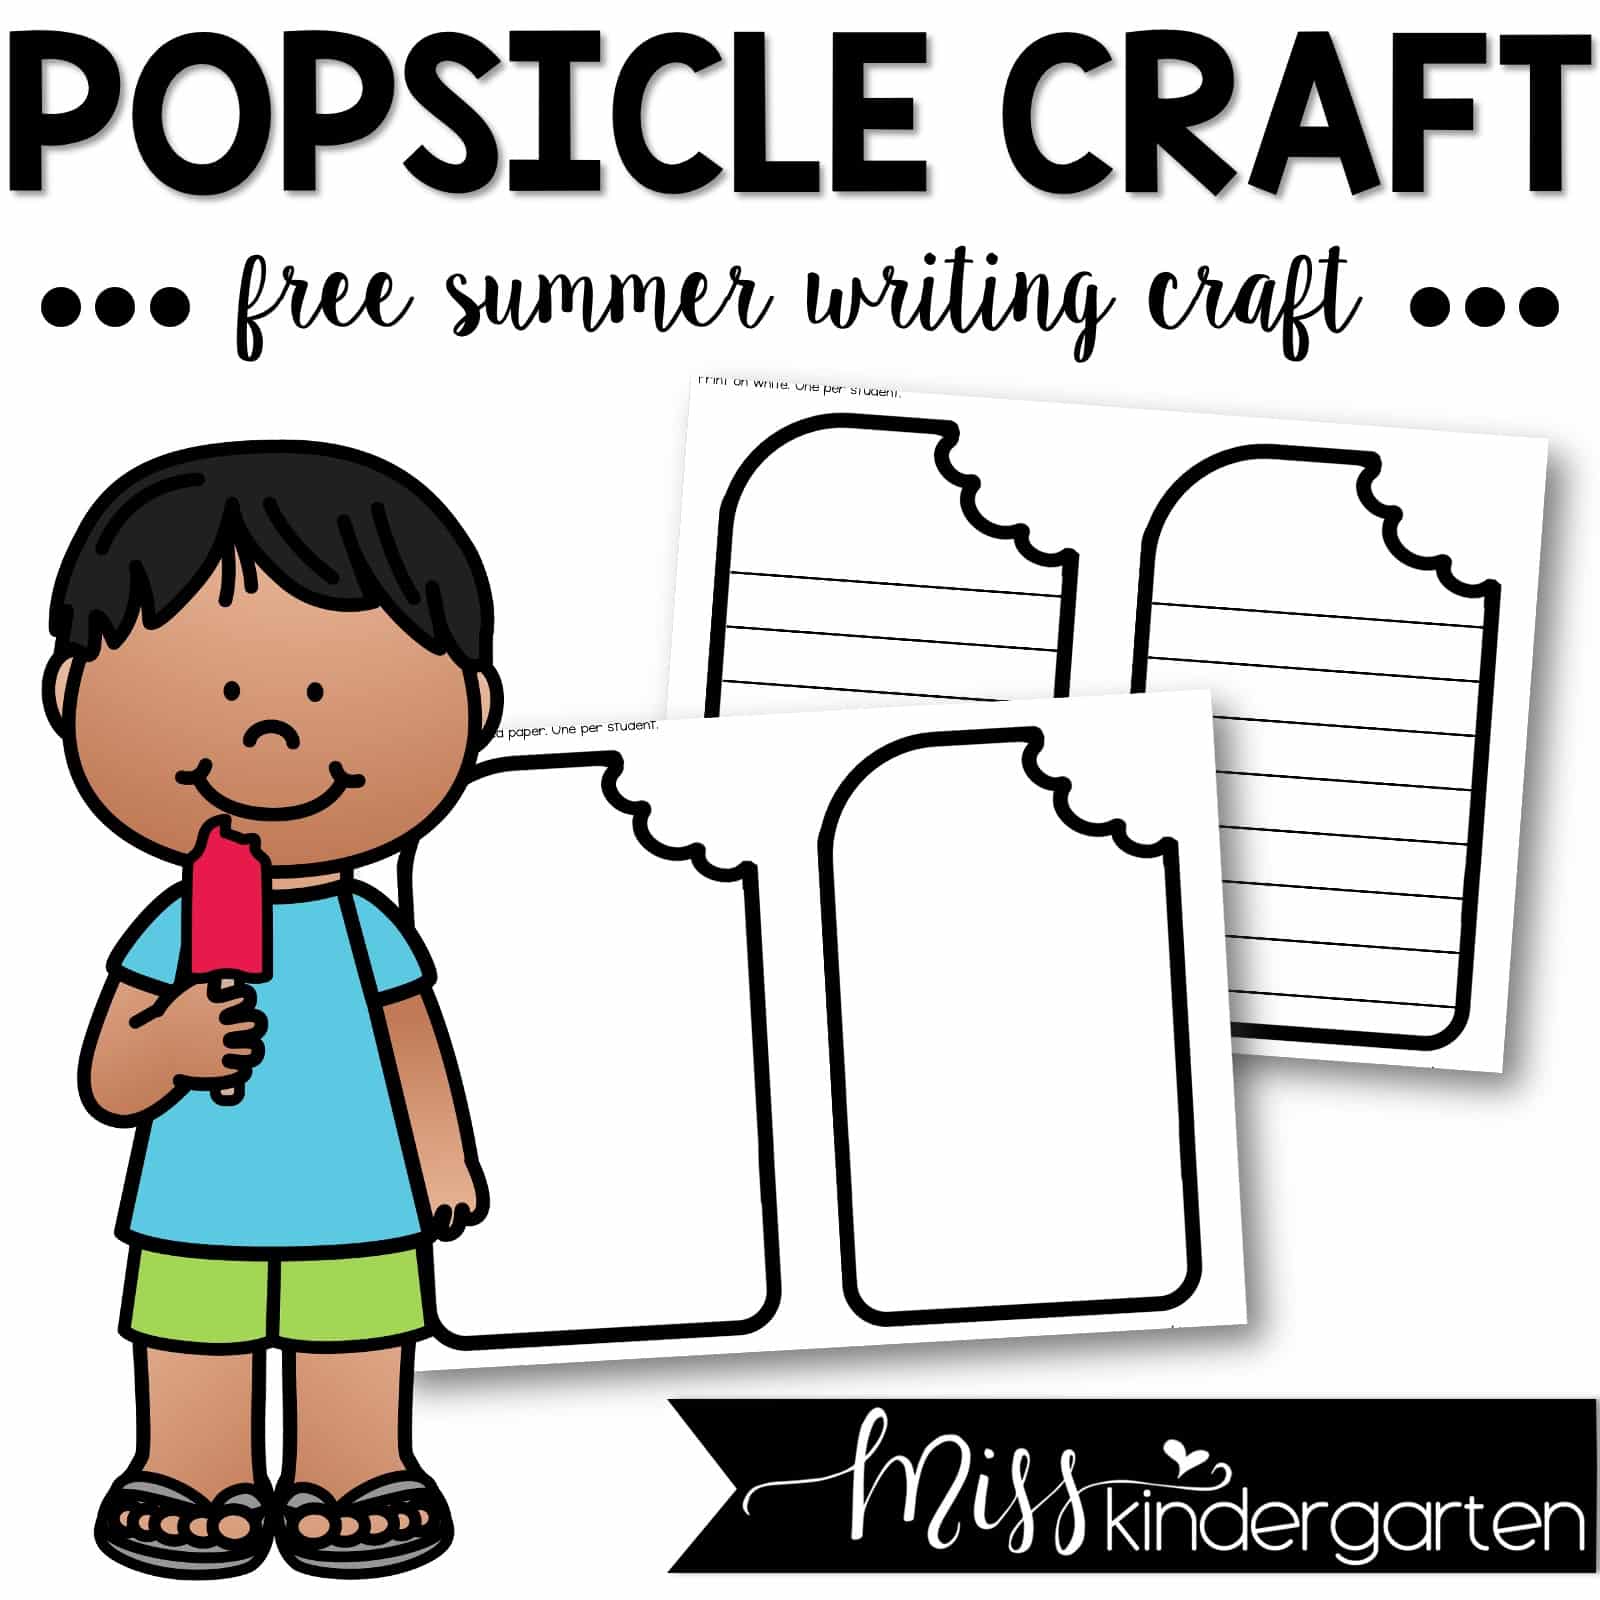 Summer Popsicle Craft - FREE Download